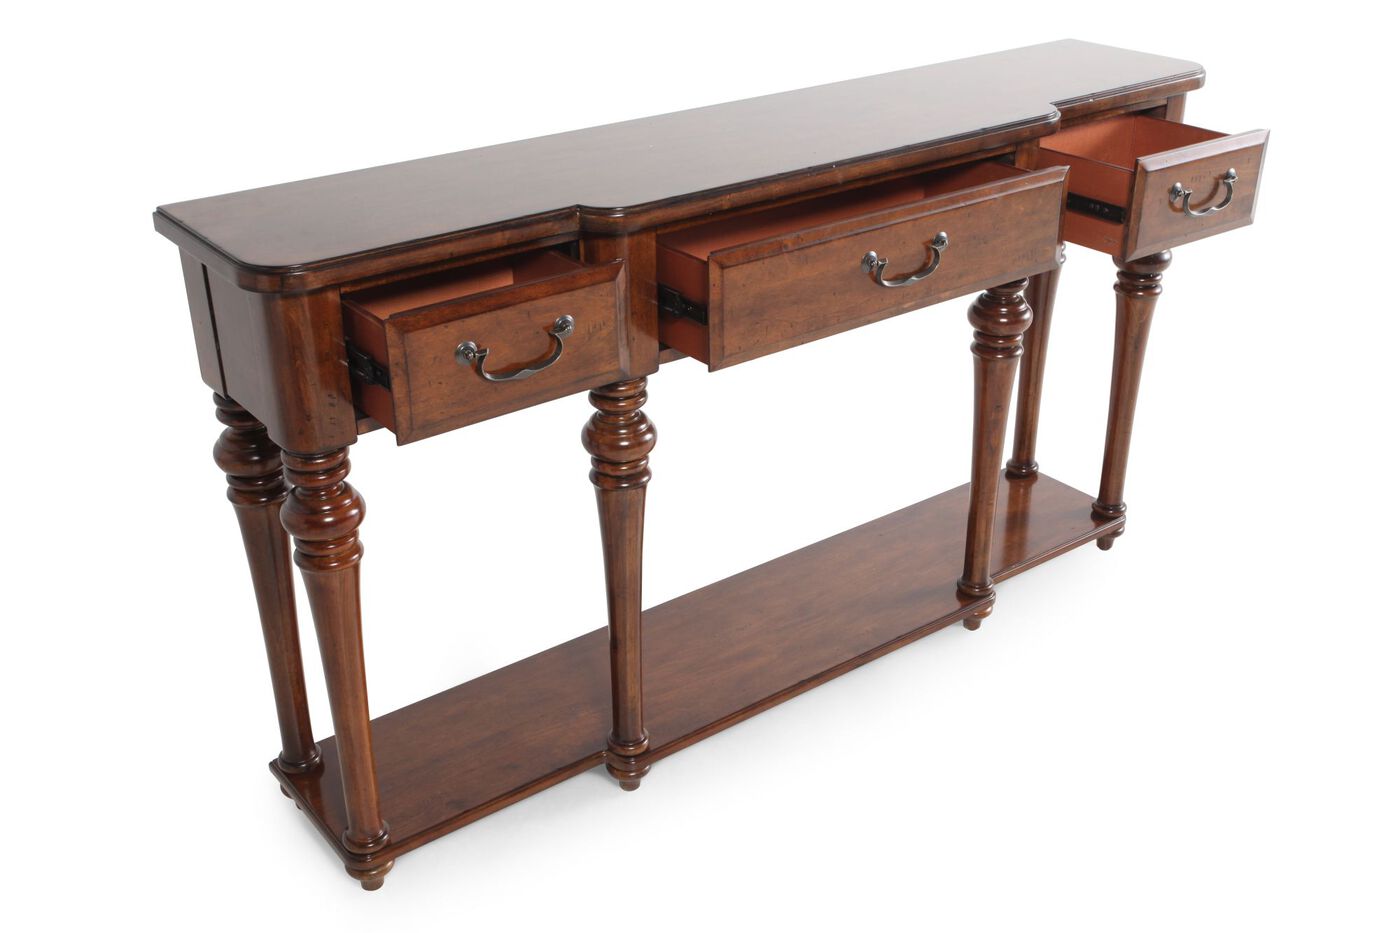 Turned Legs Contemporary Console Table in Chestnut | Mathis Brothers